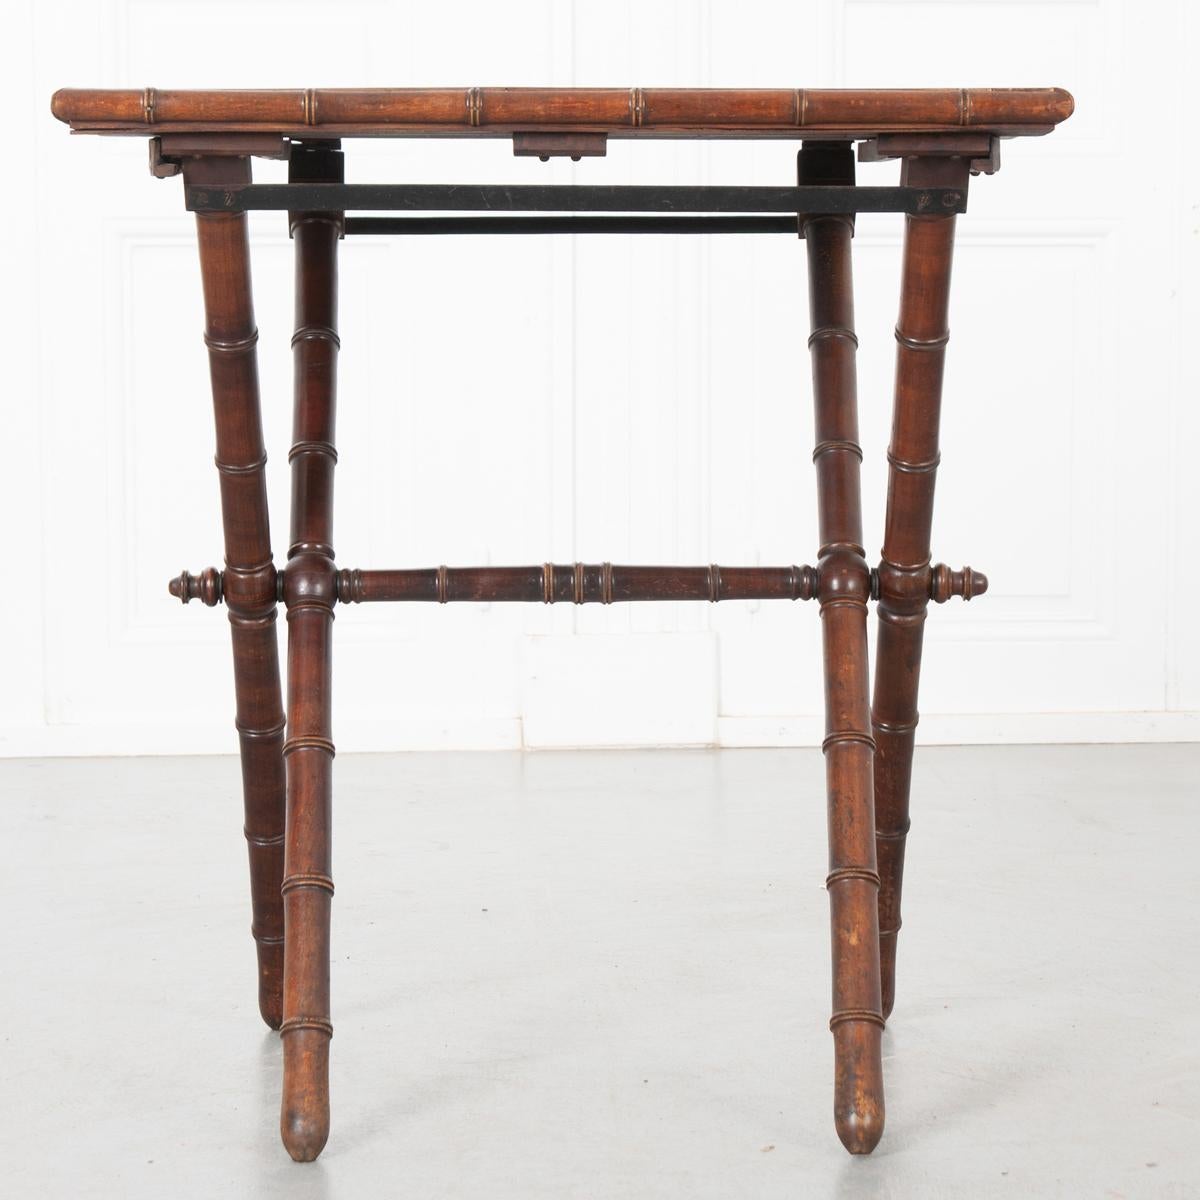 This is a French 19th century faux bamboo table. The top is a light wood surrounded by faux bamboo trim. The legs connected by a stretcher are a darker wood made to resemble bamboo. They will slide in one direction so the top folds down and can be